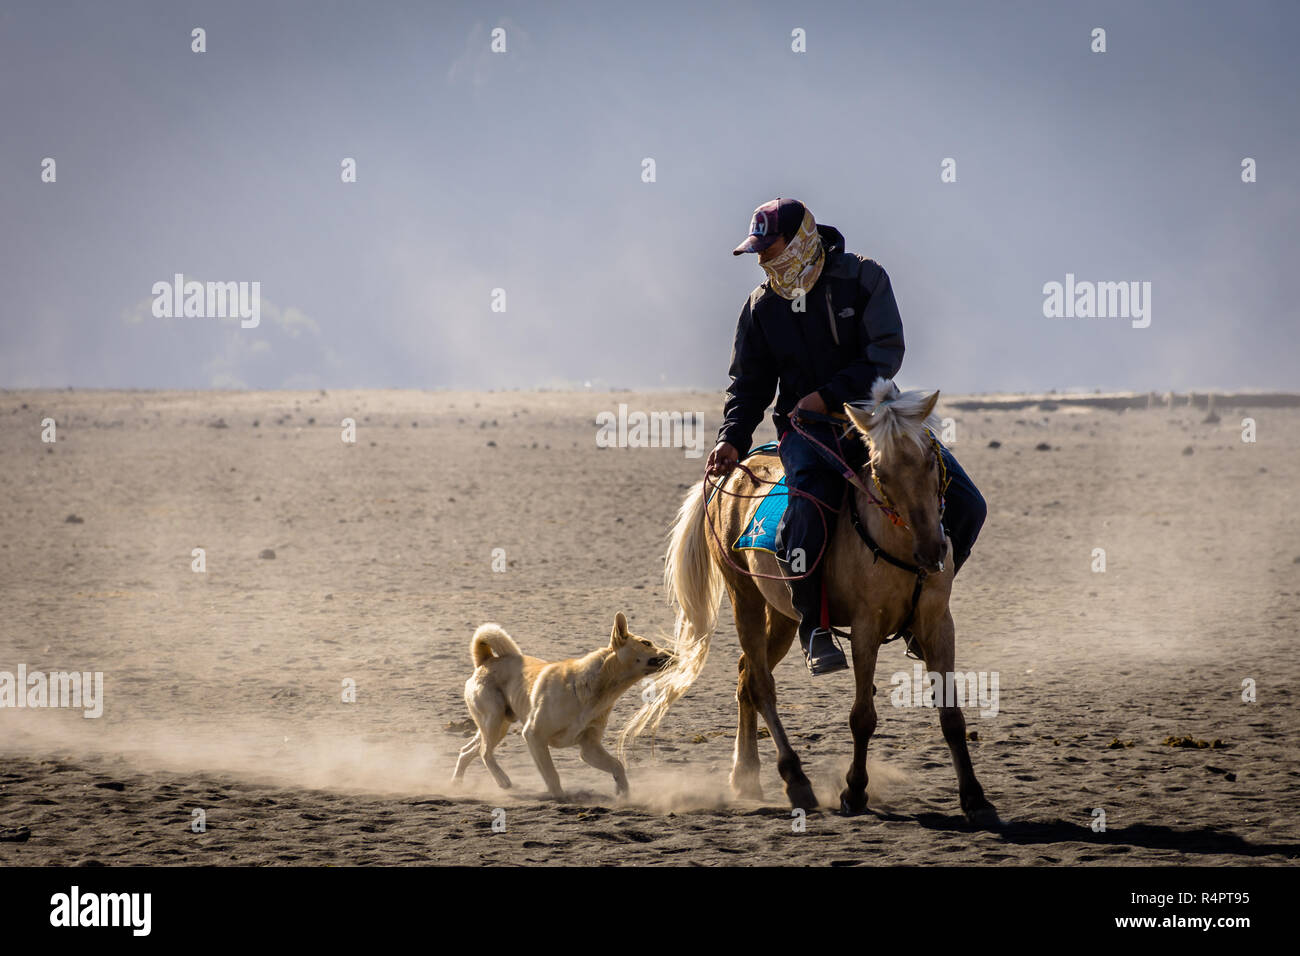 Bromo, Indonesia - June 15th, 2018 : A dog chases and bites the horse tail of a horse rider at Bromo Stock Photo